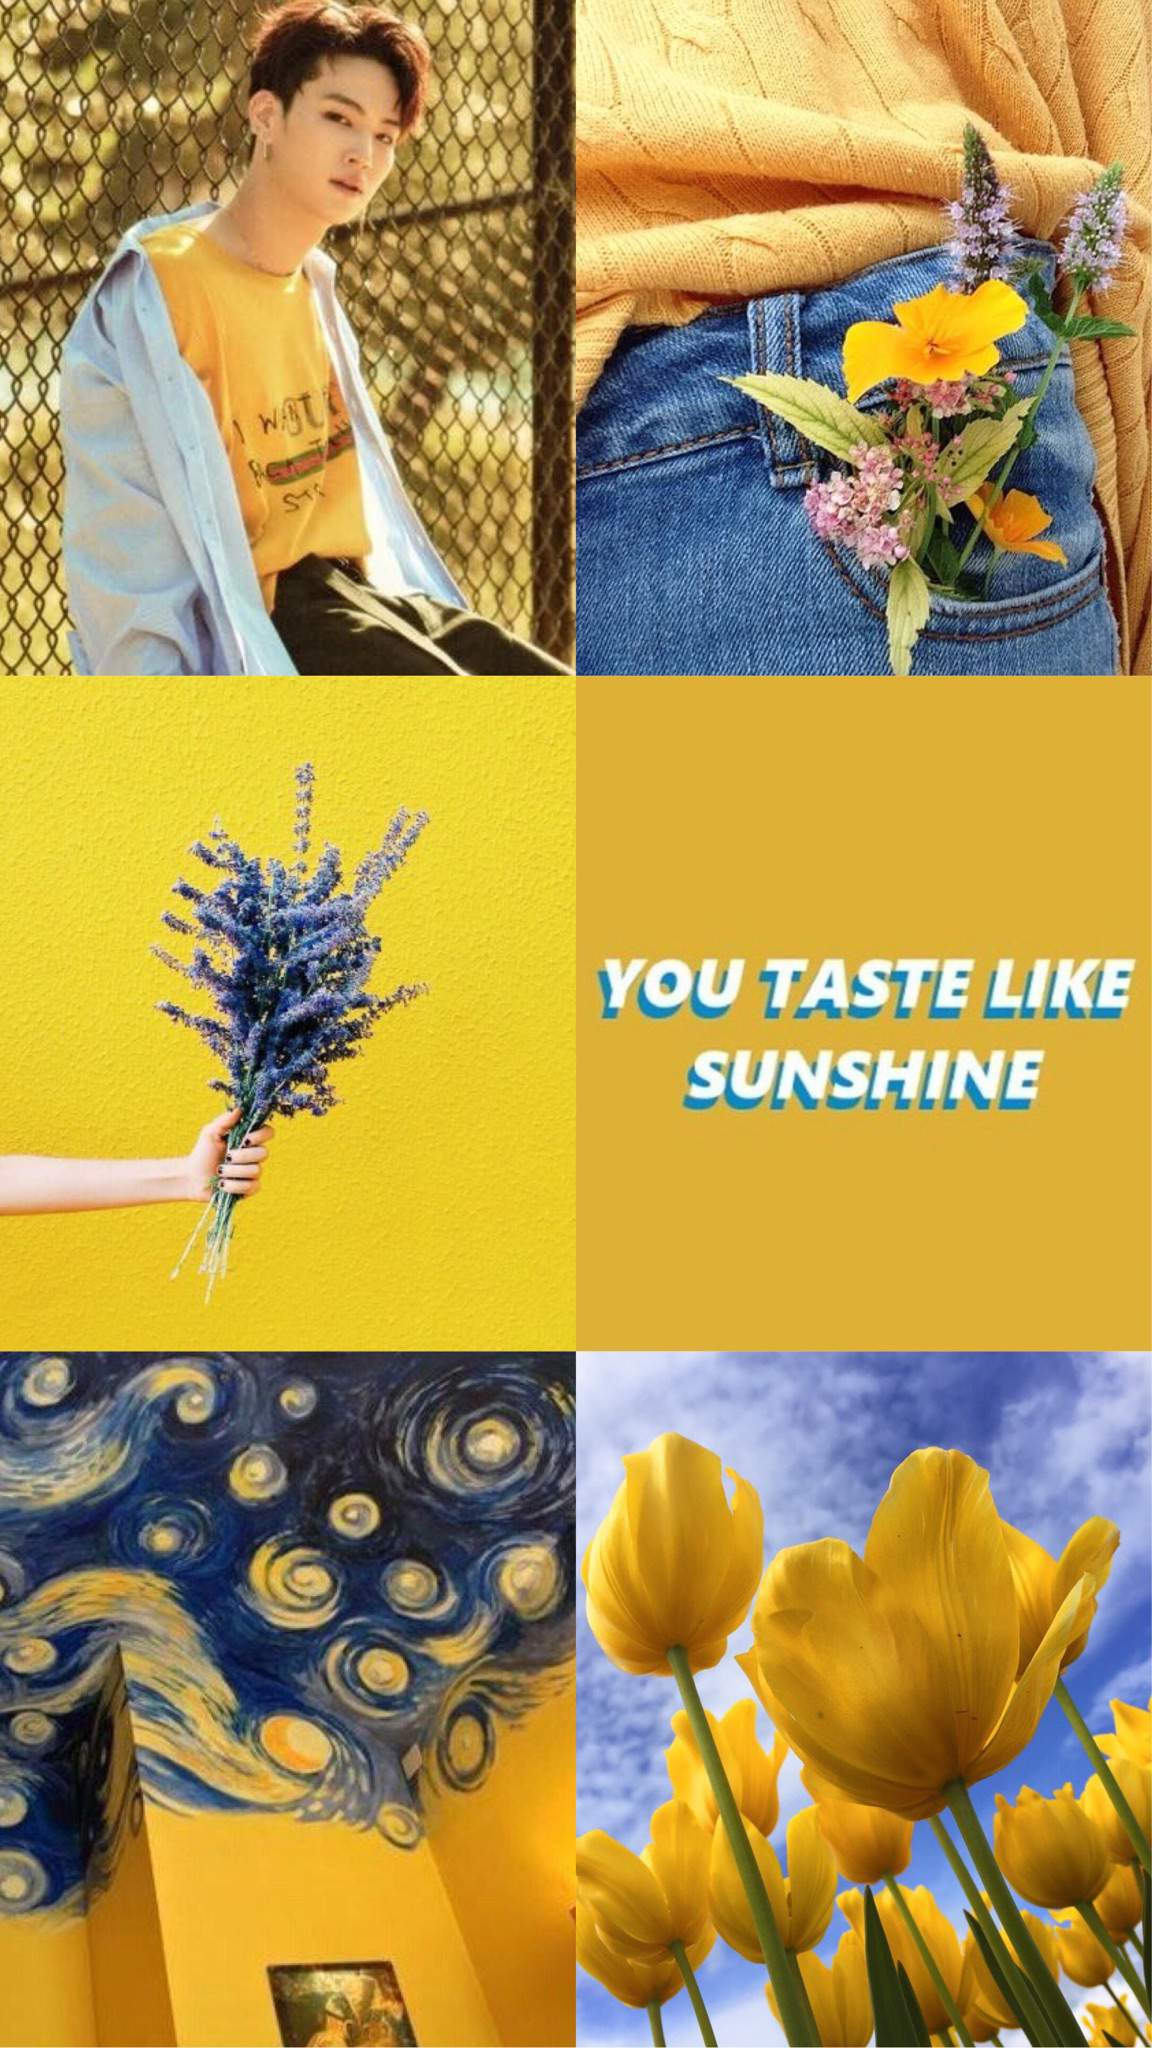 Aesthetic phone background with a collage of yellow and blue images and a picture of BTS member Jimin - Summer, sunshine